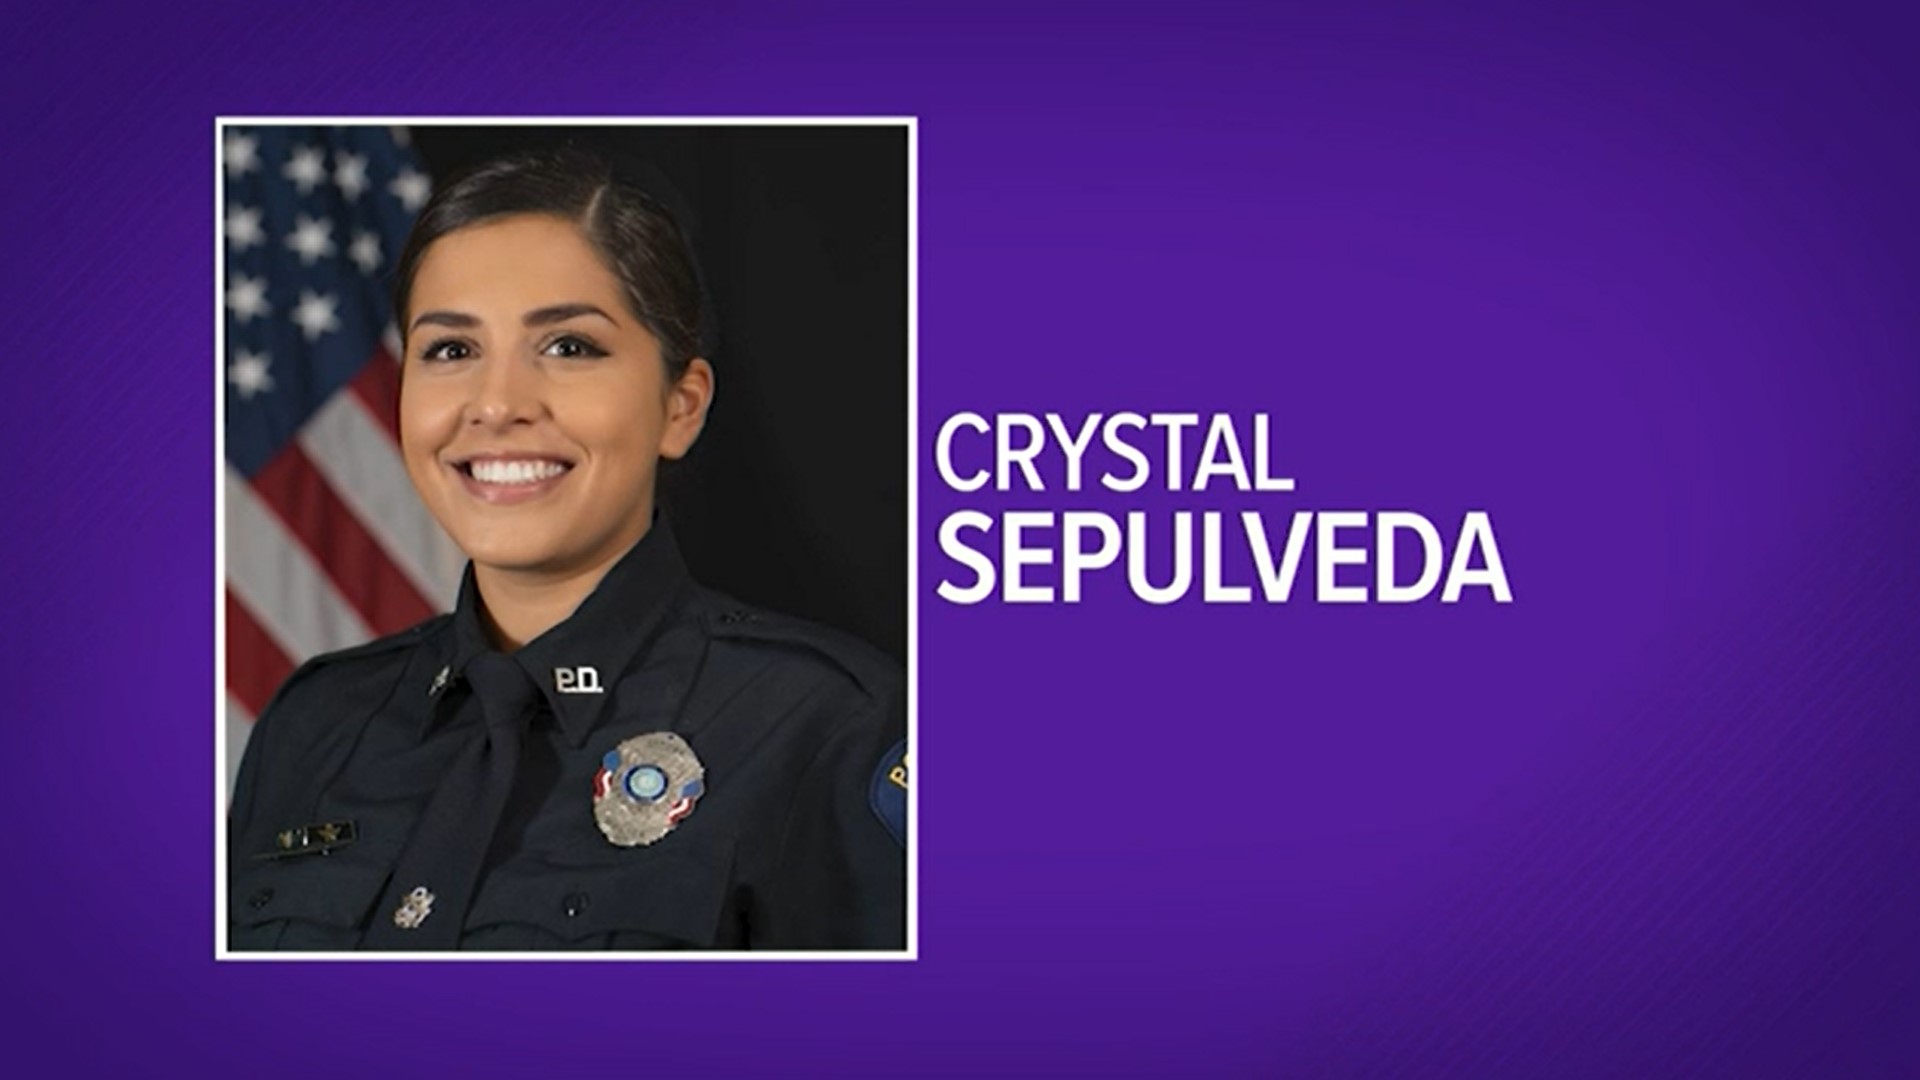 Missouri City PD says they're grateful for the support Officer Crystal Sepulveda is getting.